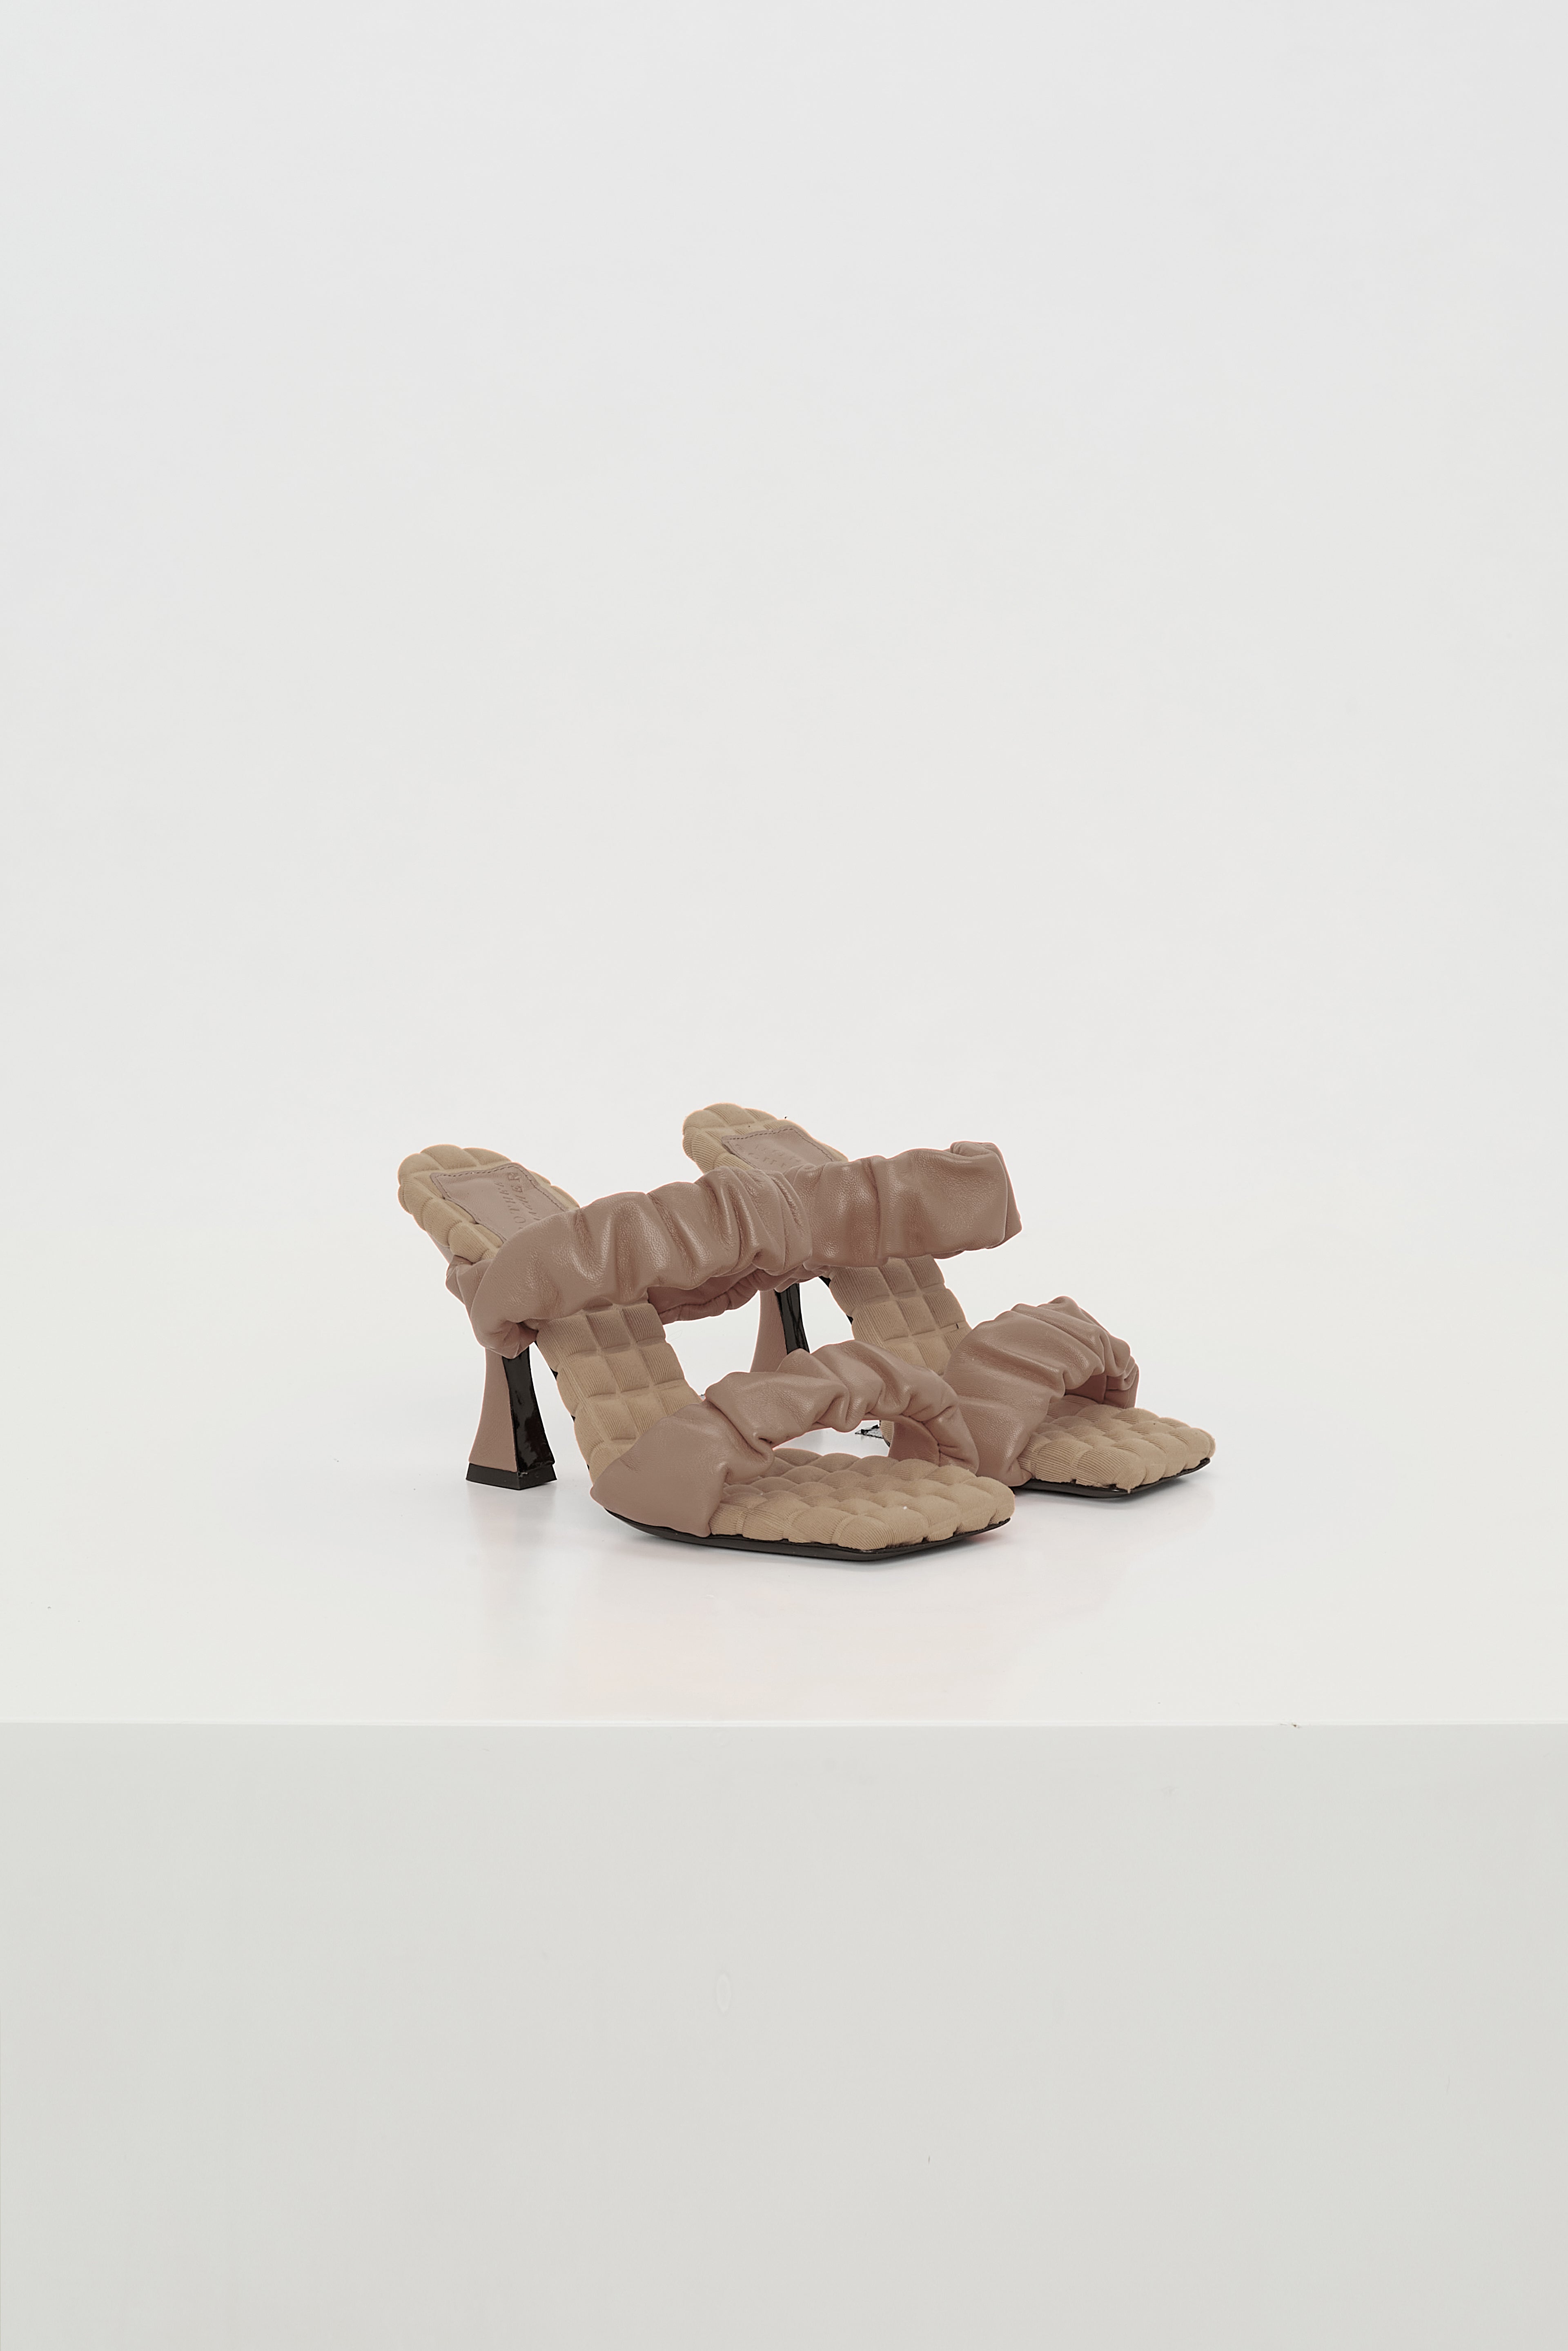 Dorothee-Schumacher-OUTLET-SALE-SPORTY-FEMININITY-sandal-heeled-Sandalen-ARCHIVE-COLLECTION_2e37a812-27bc-4299-b487-c6a47112a524.jpg